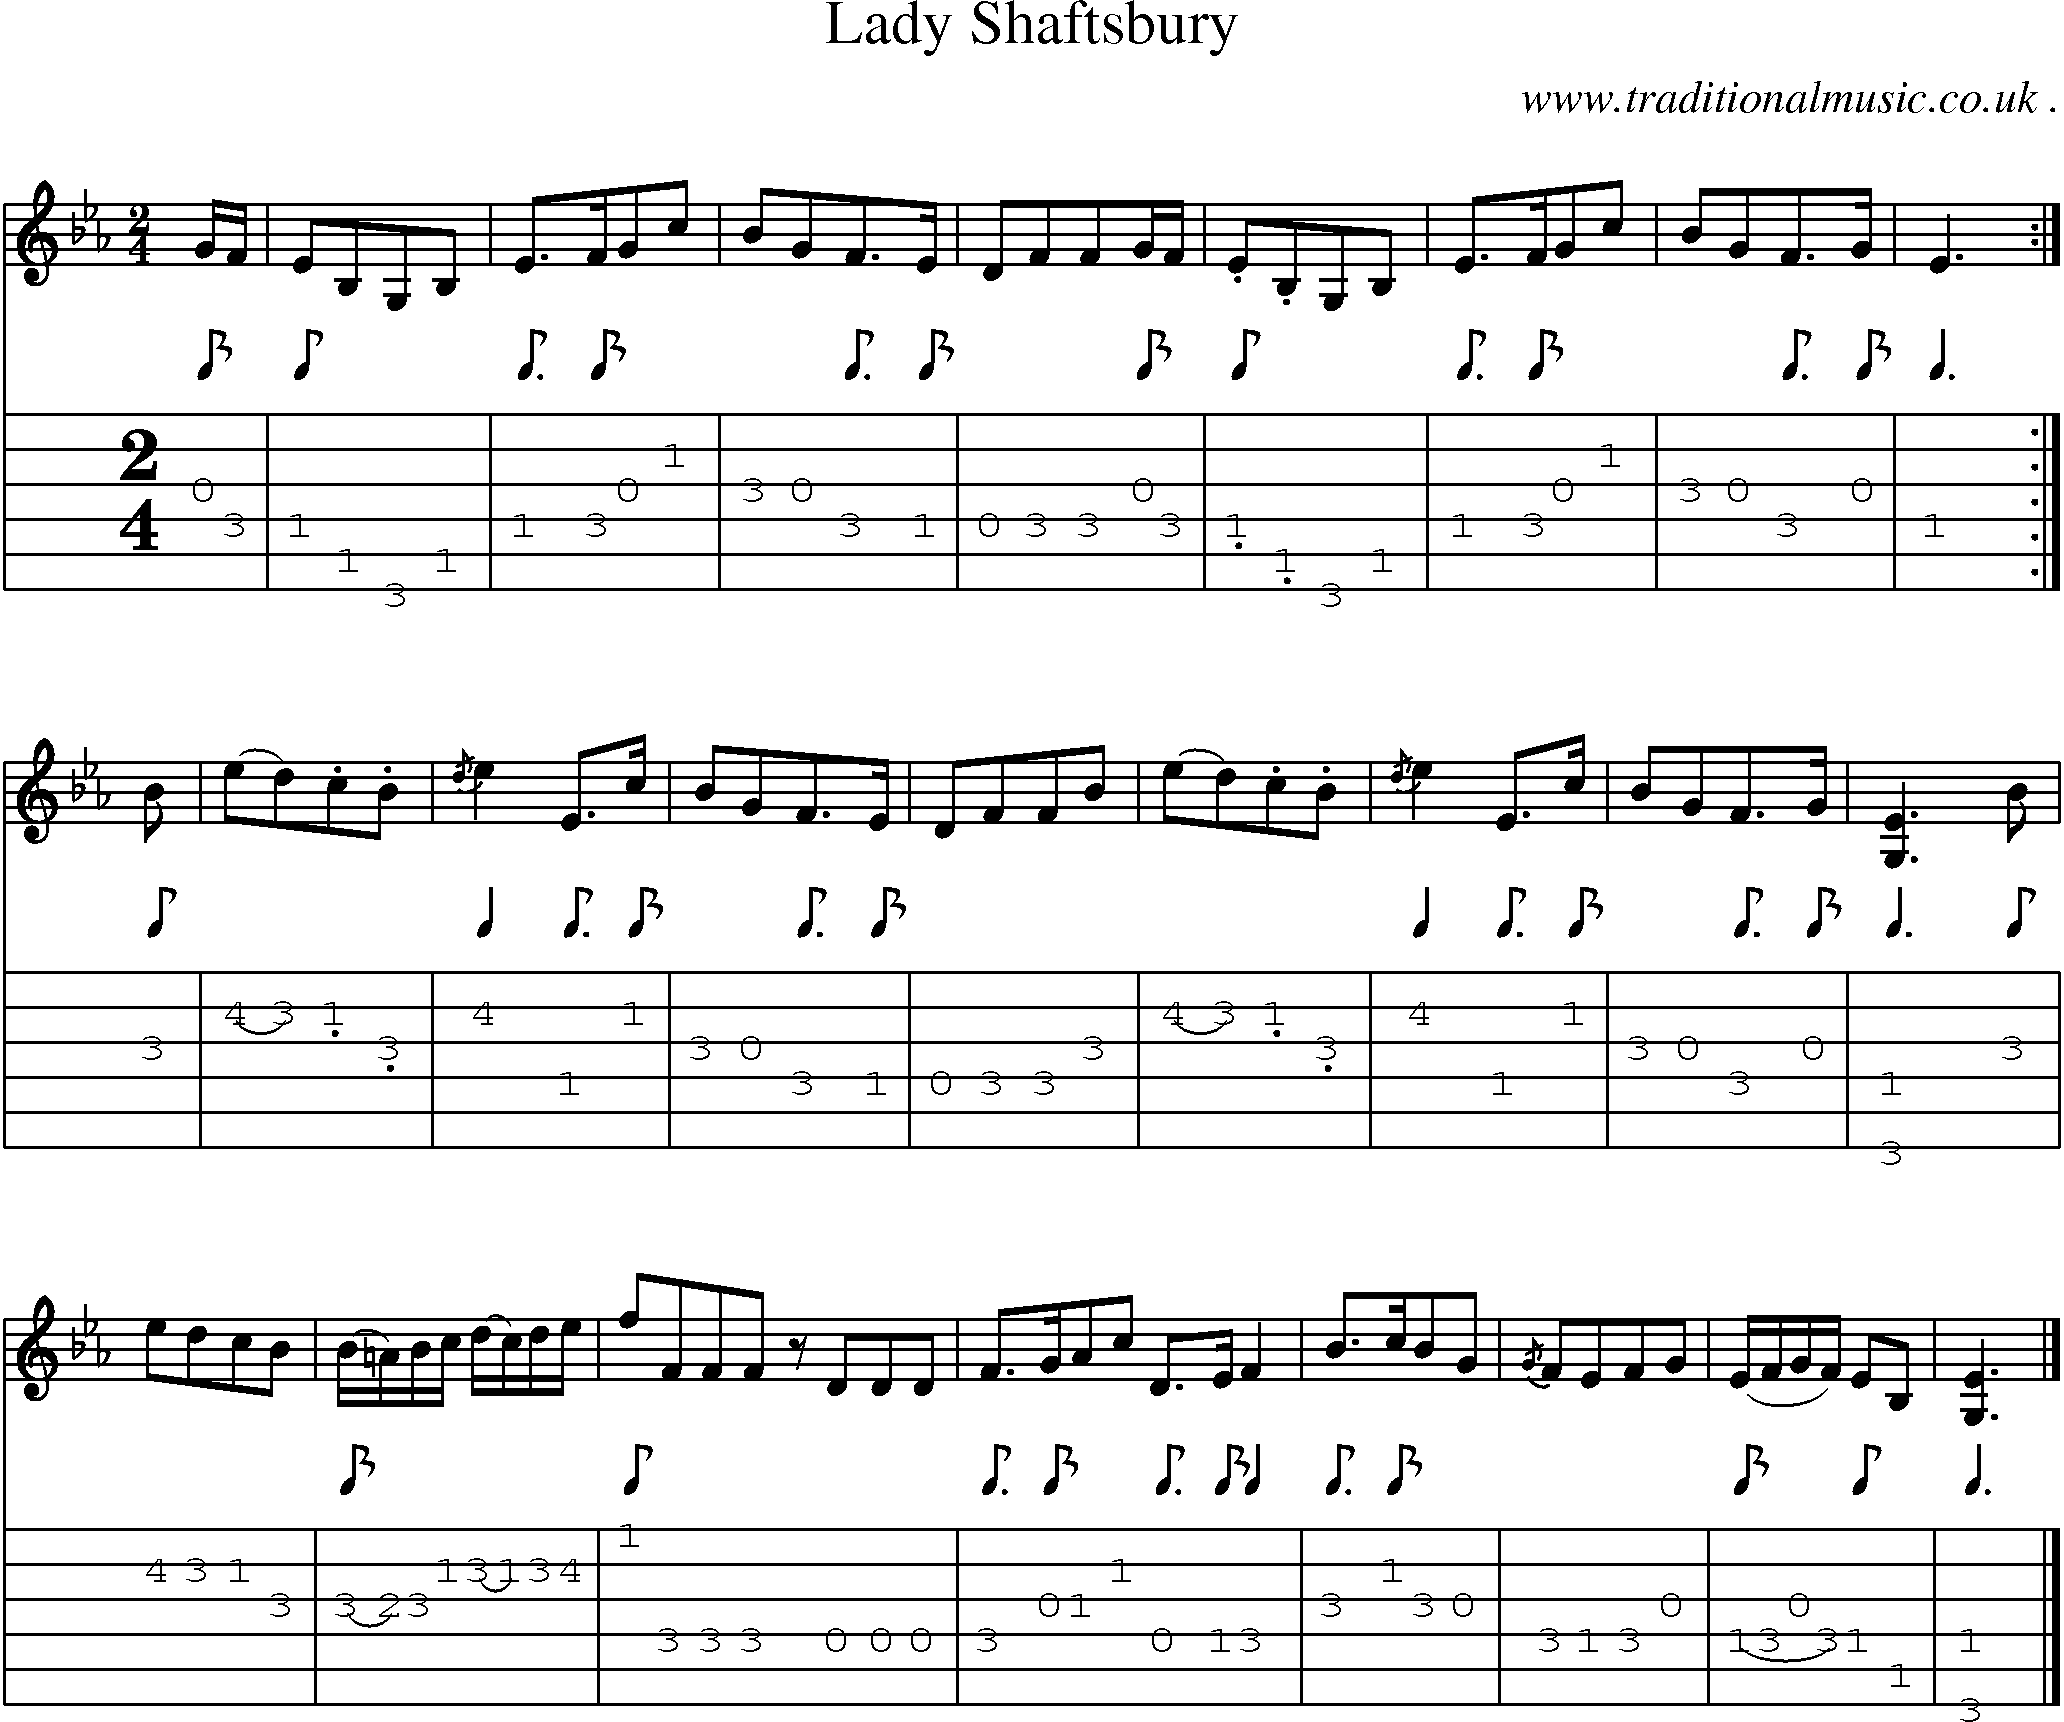 Sheet-music  score, Chords and Guitar Tabs for Lady Shaftsbury